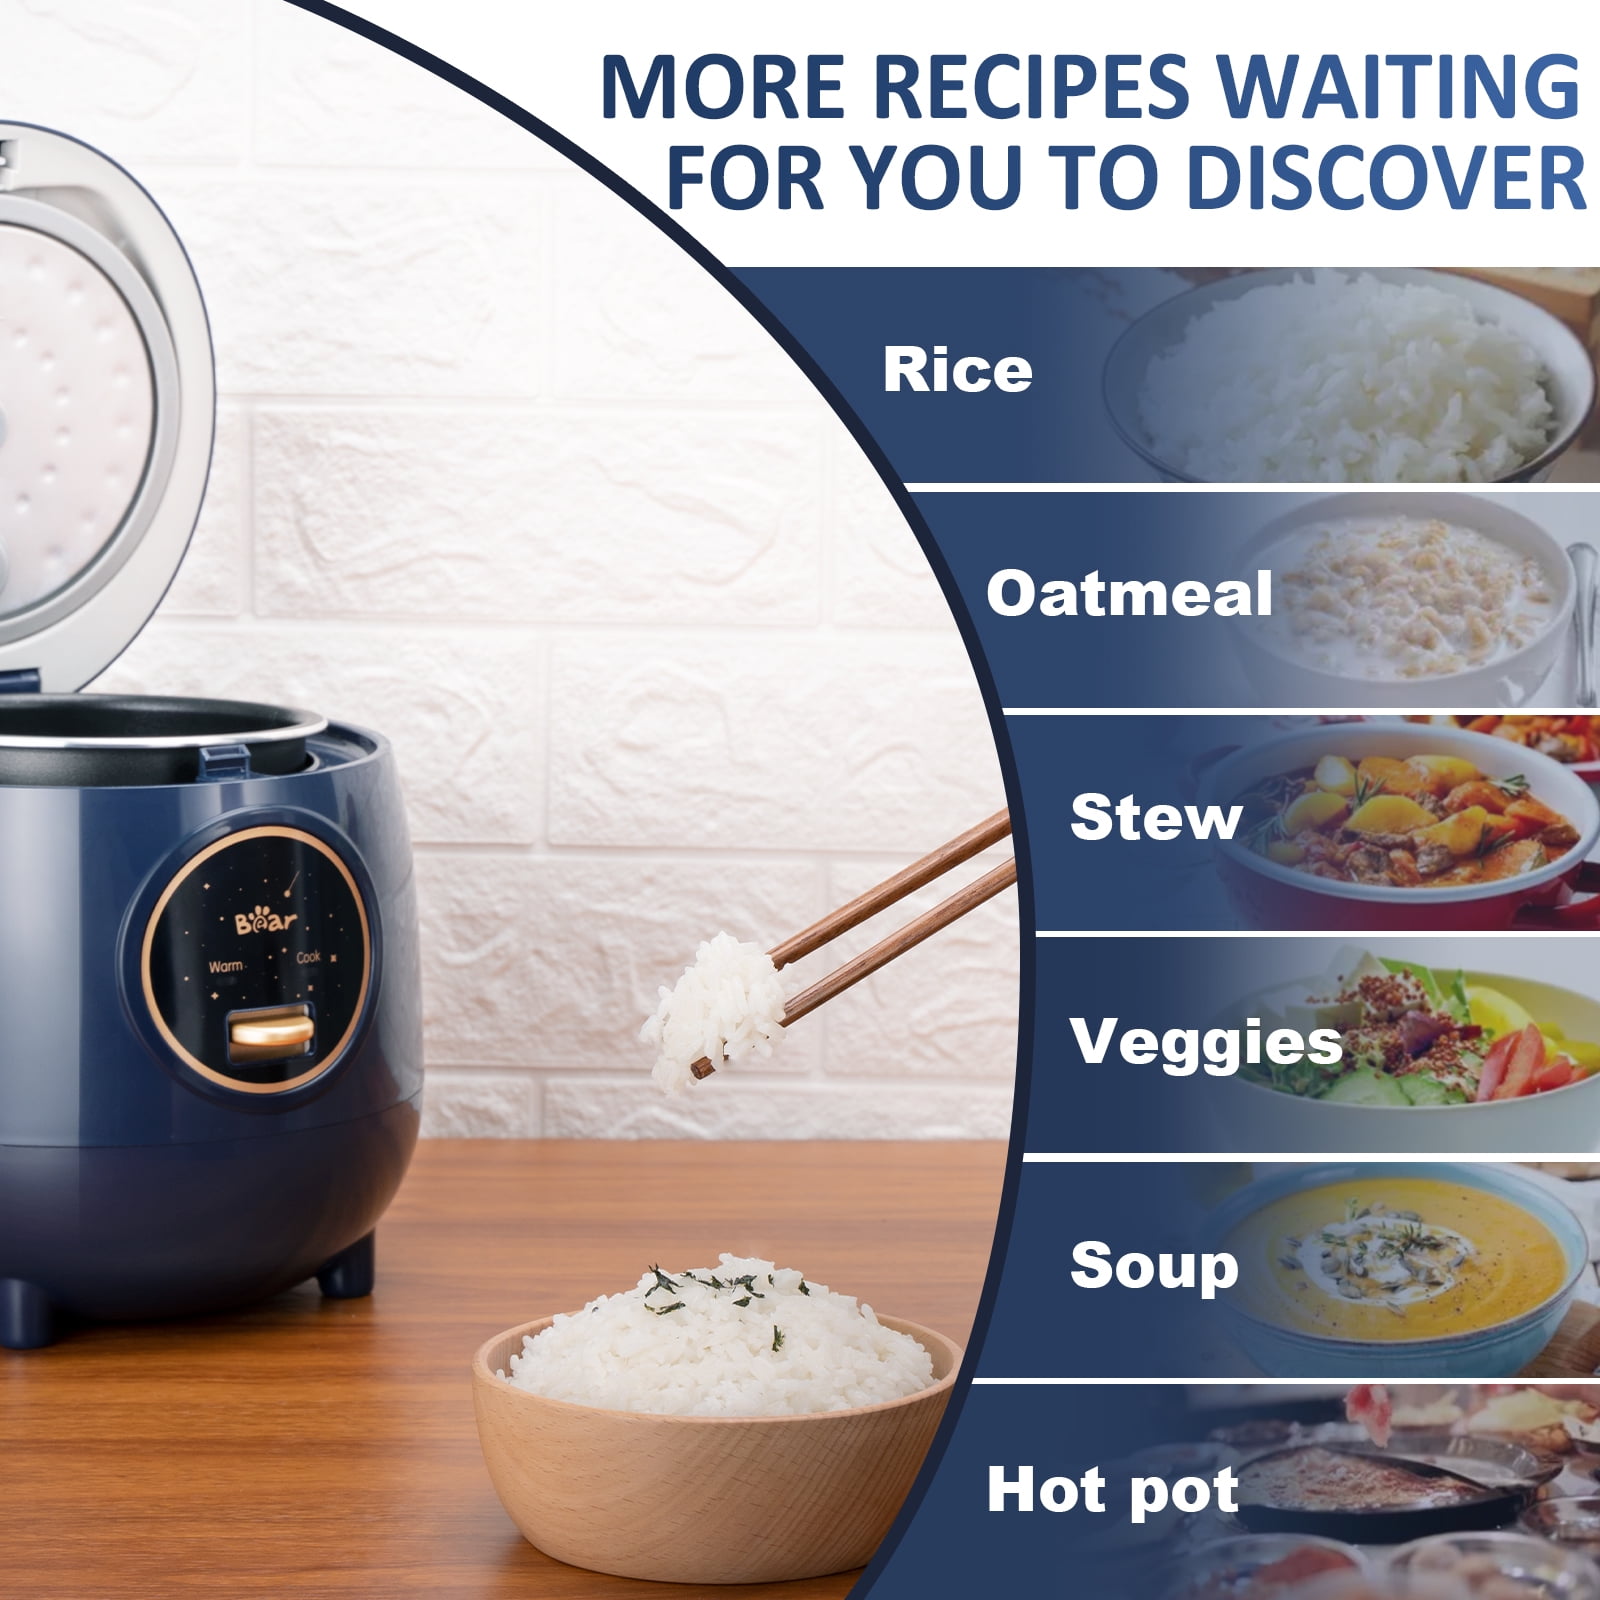 Bear Rice Cooker 3 Cups Uncooked Fast Electric Pressure Cooker Portable  Multi